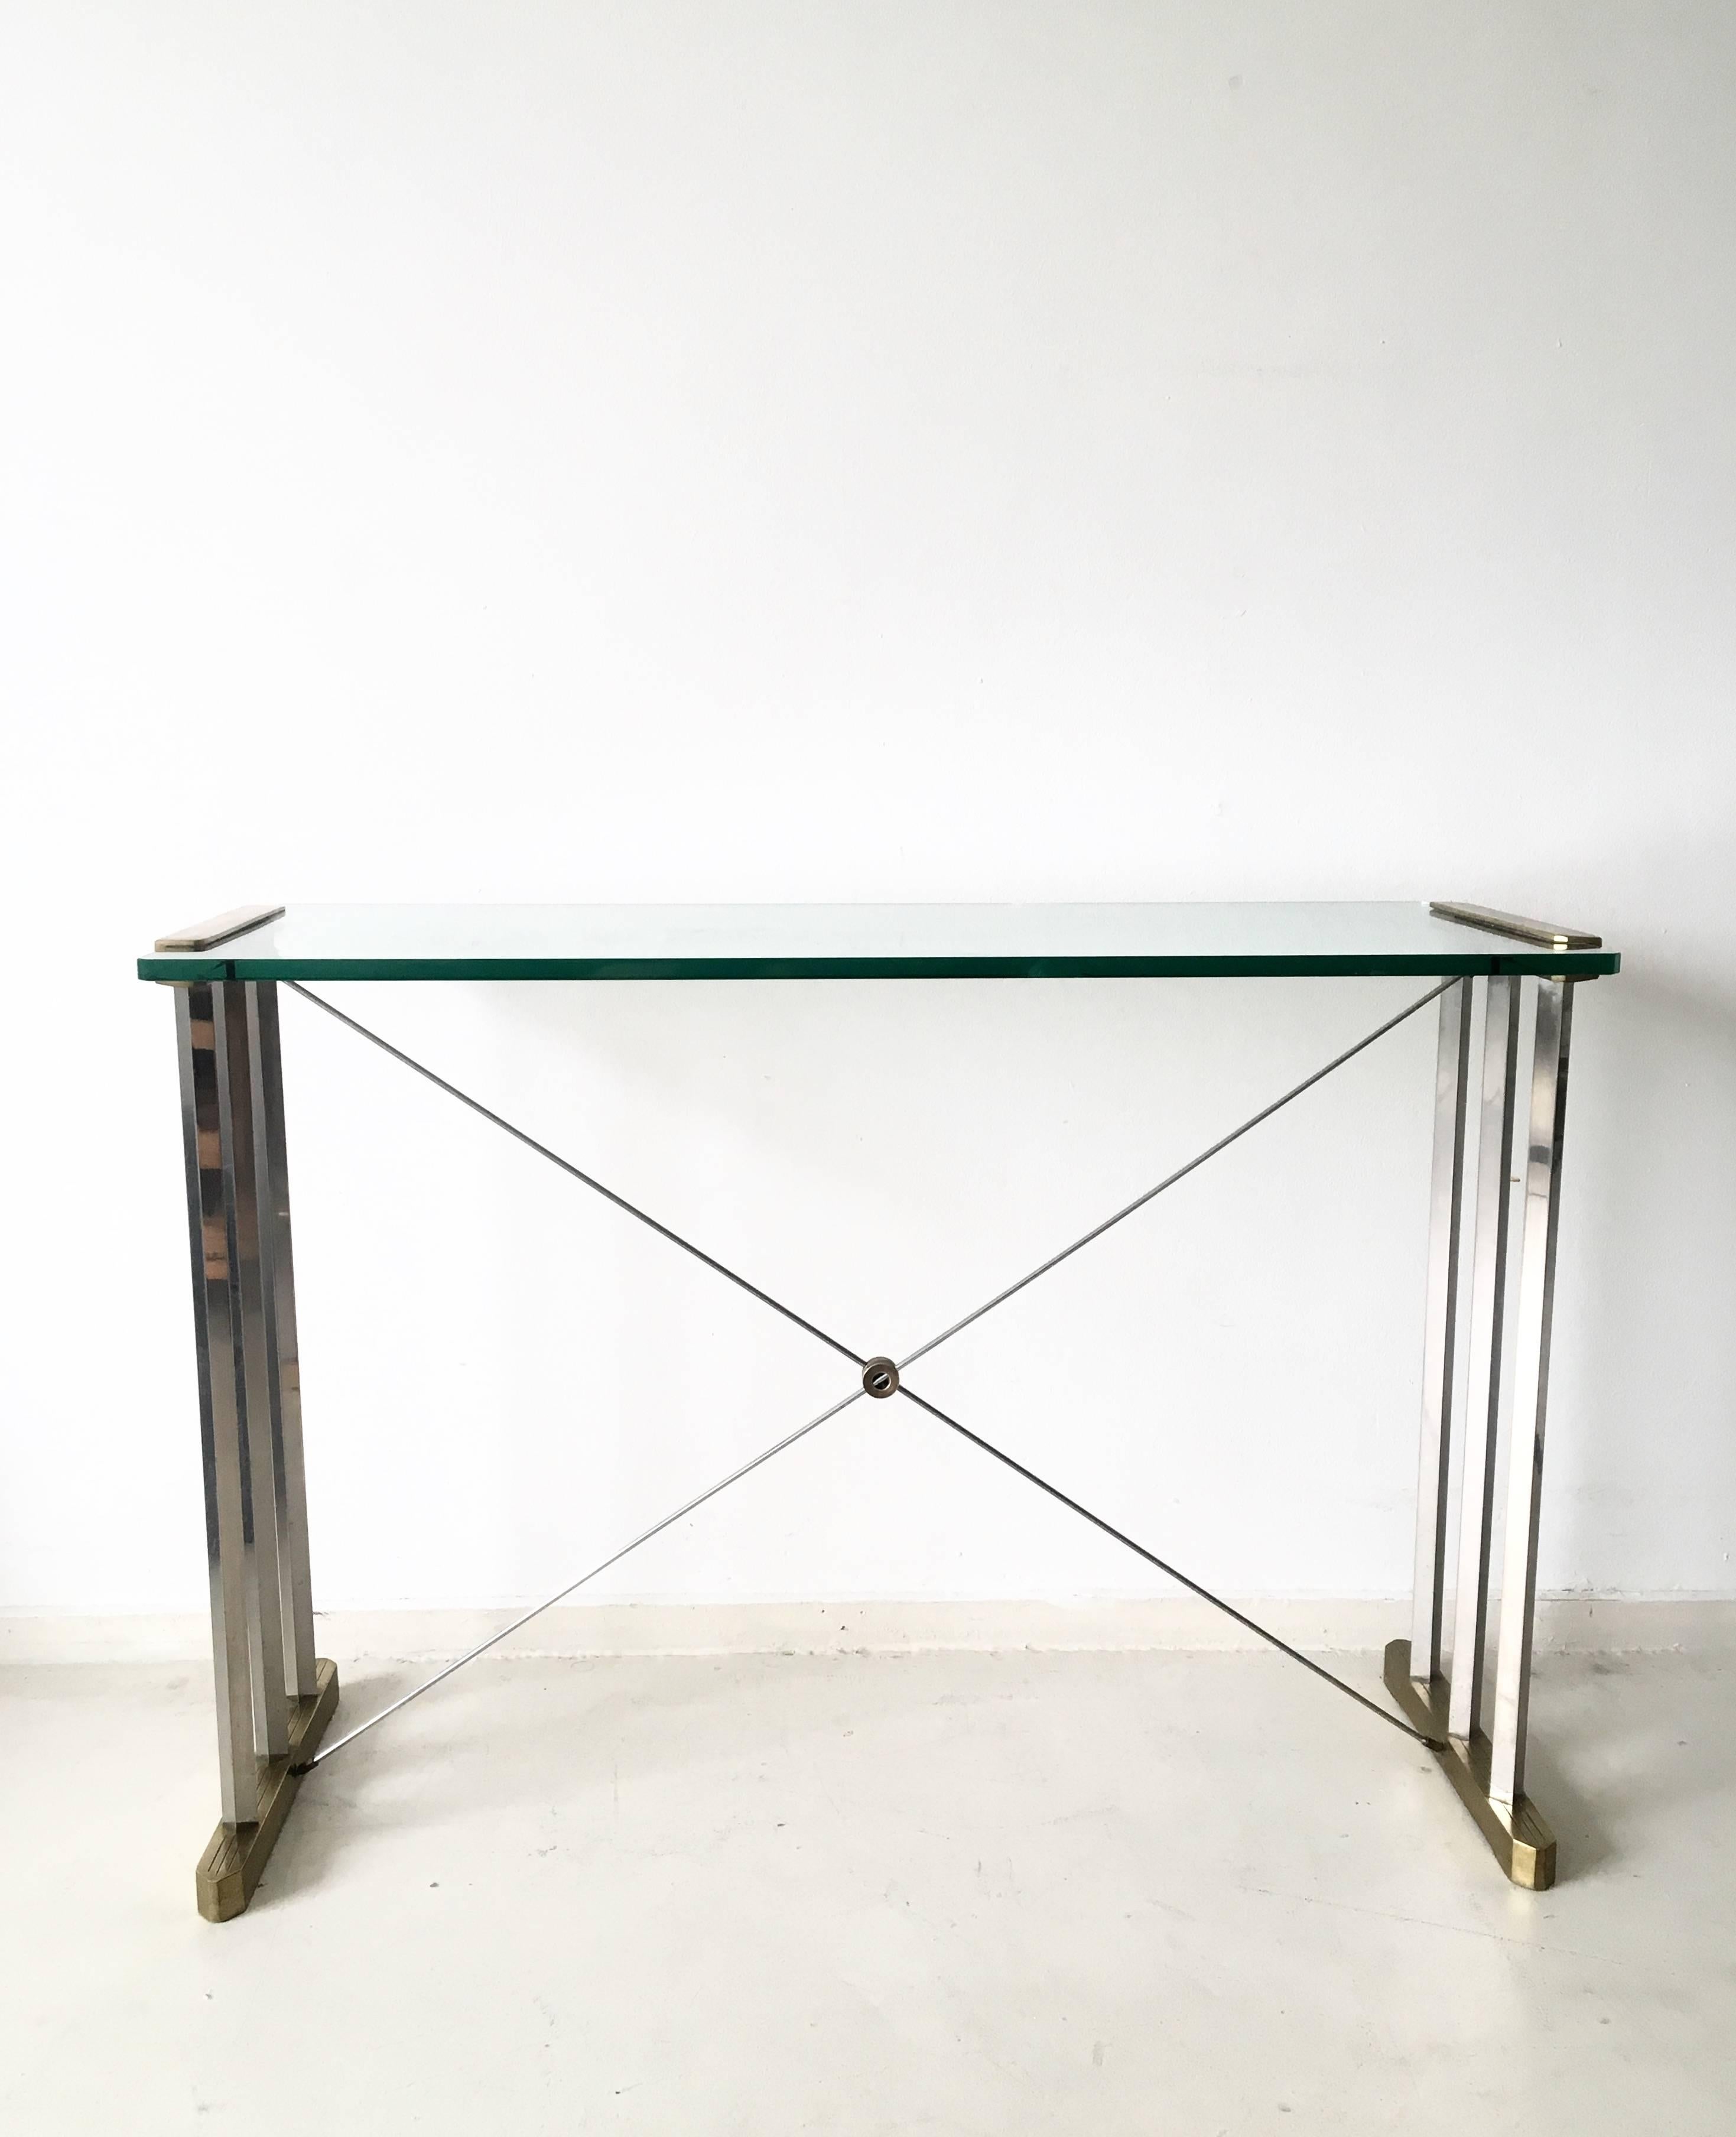 This model, features a metal frame with brass and steel elements and a thick glass top. 
This piece is in a very good condition but has unfortunately one chip on it's glass top. However the glass top can be replaced with another original one for